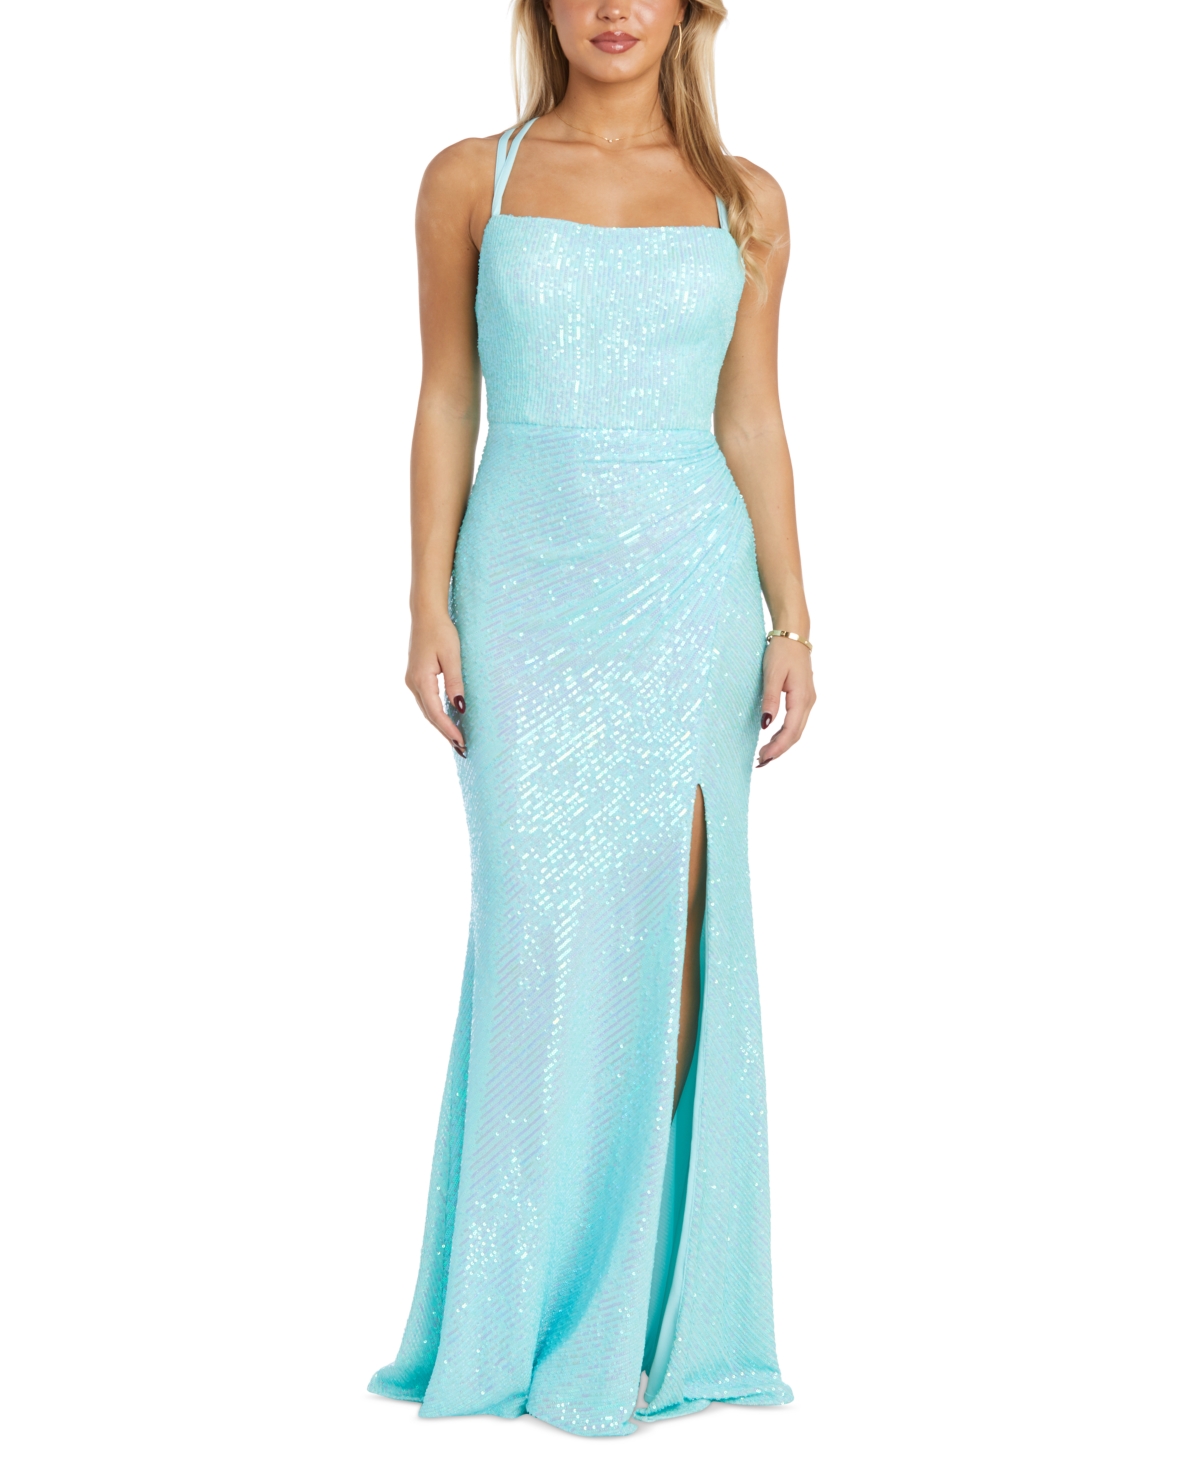 Women's Iridescent Sequined Strappy-Back Gown - Aquamarine